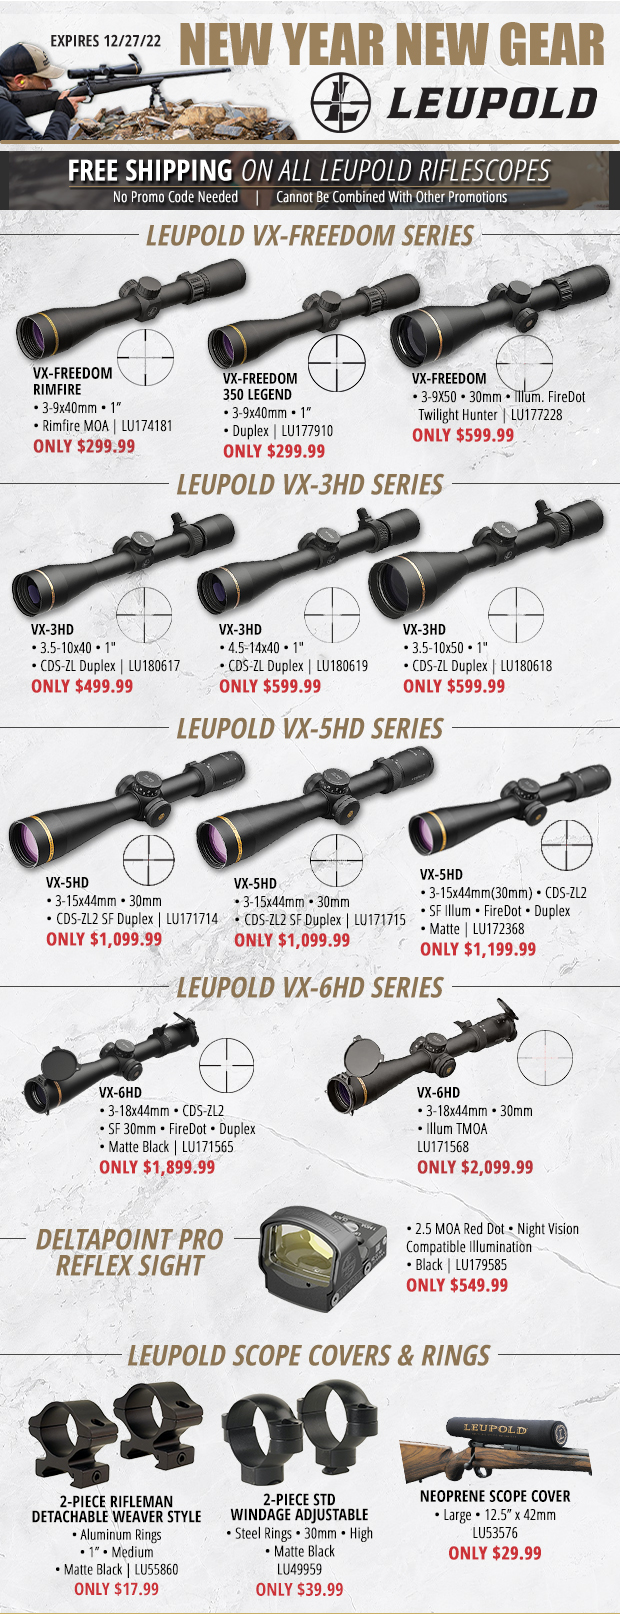 New Year New Gear with Leupold